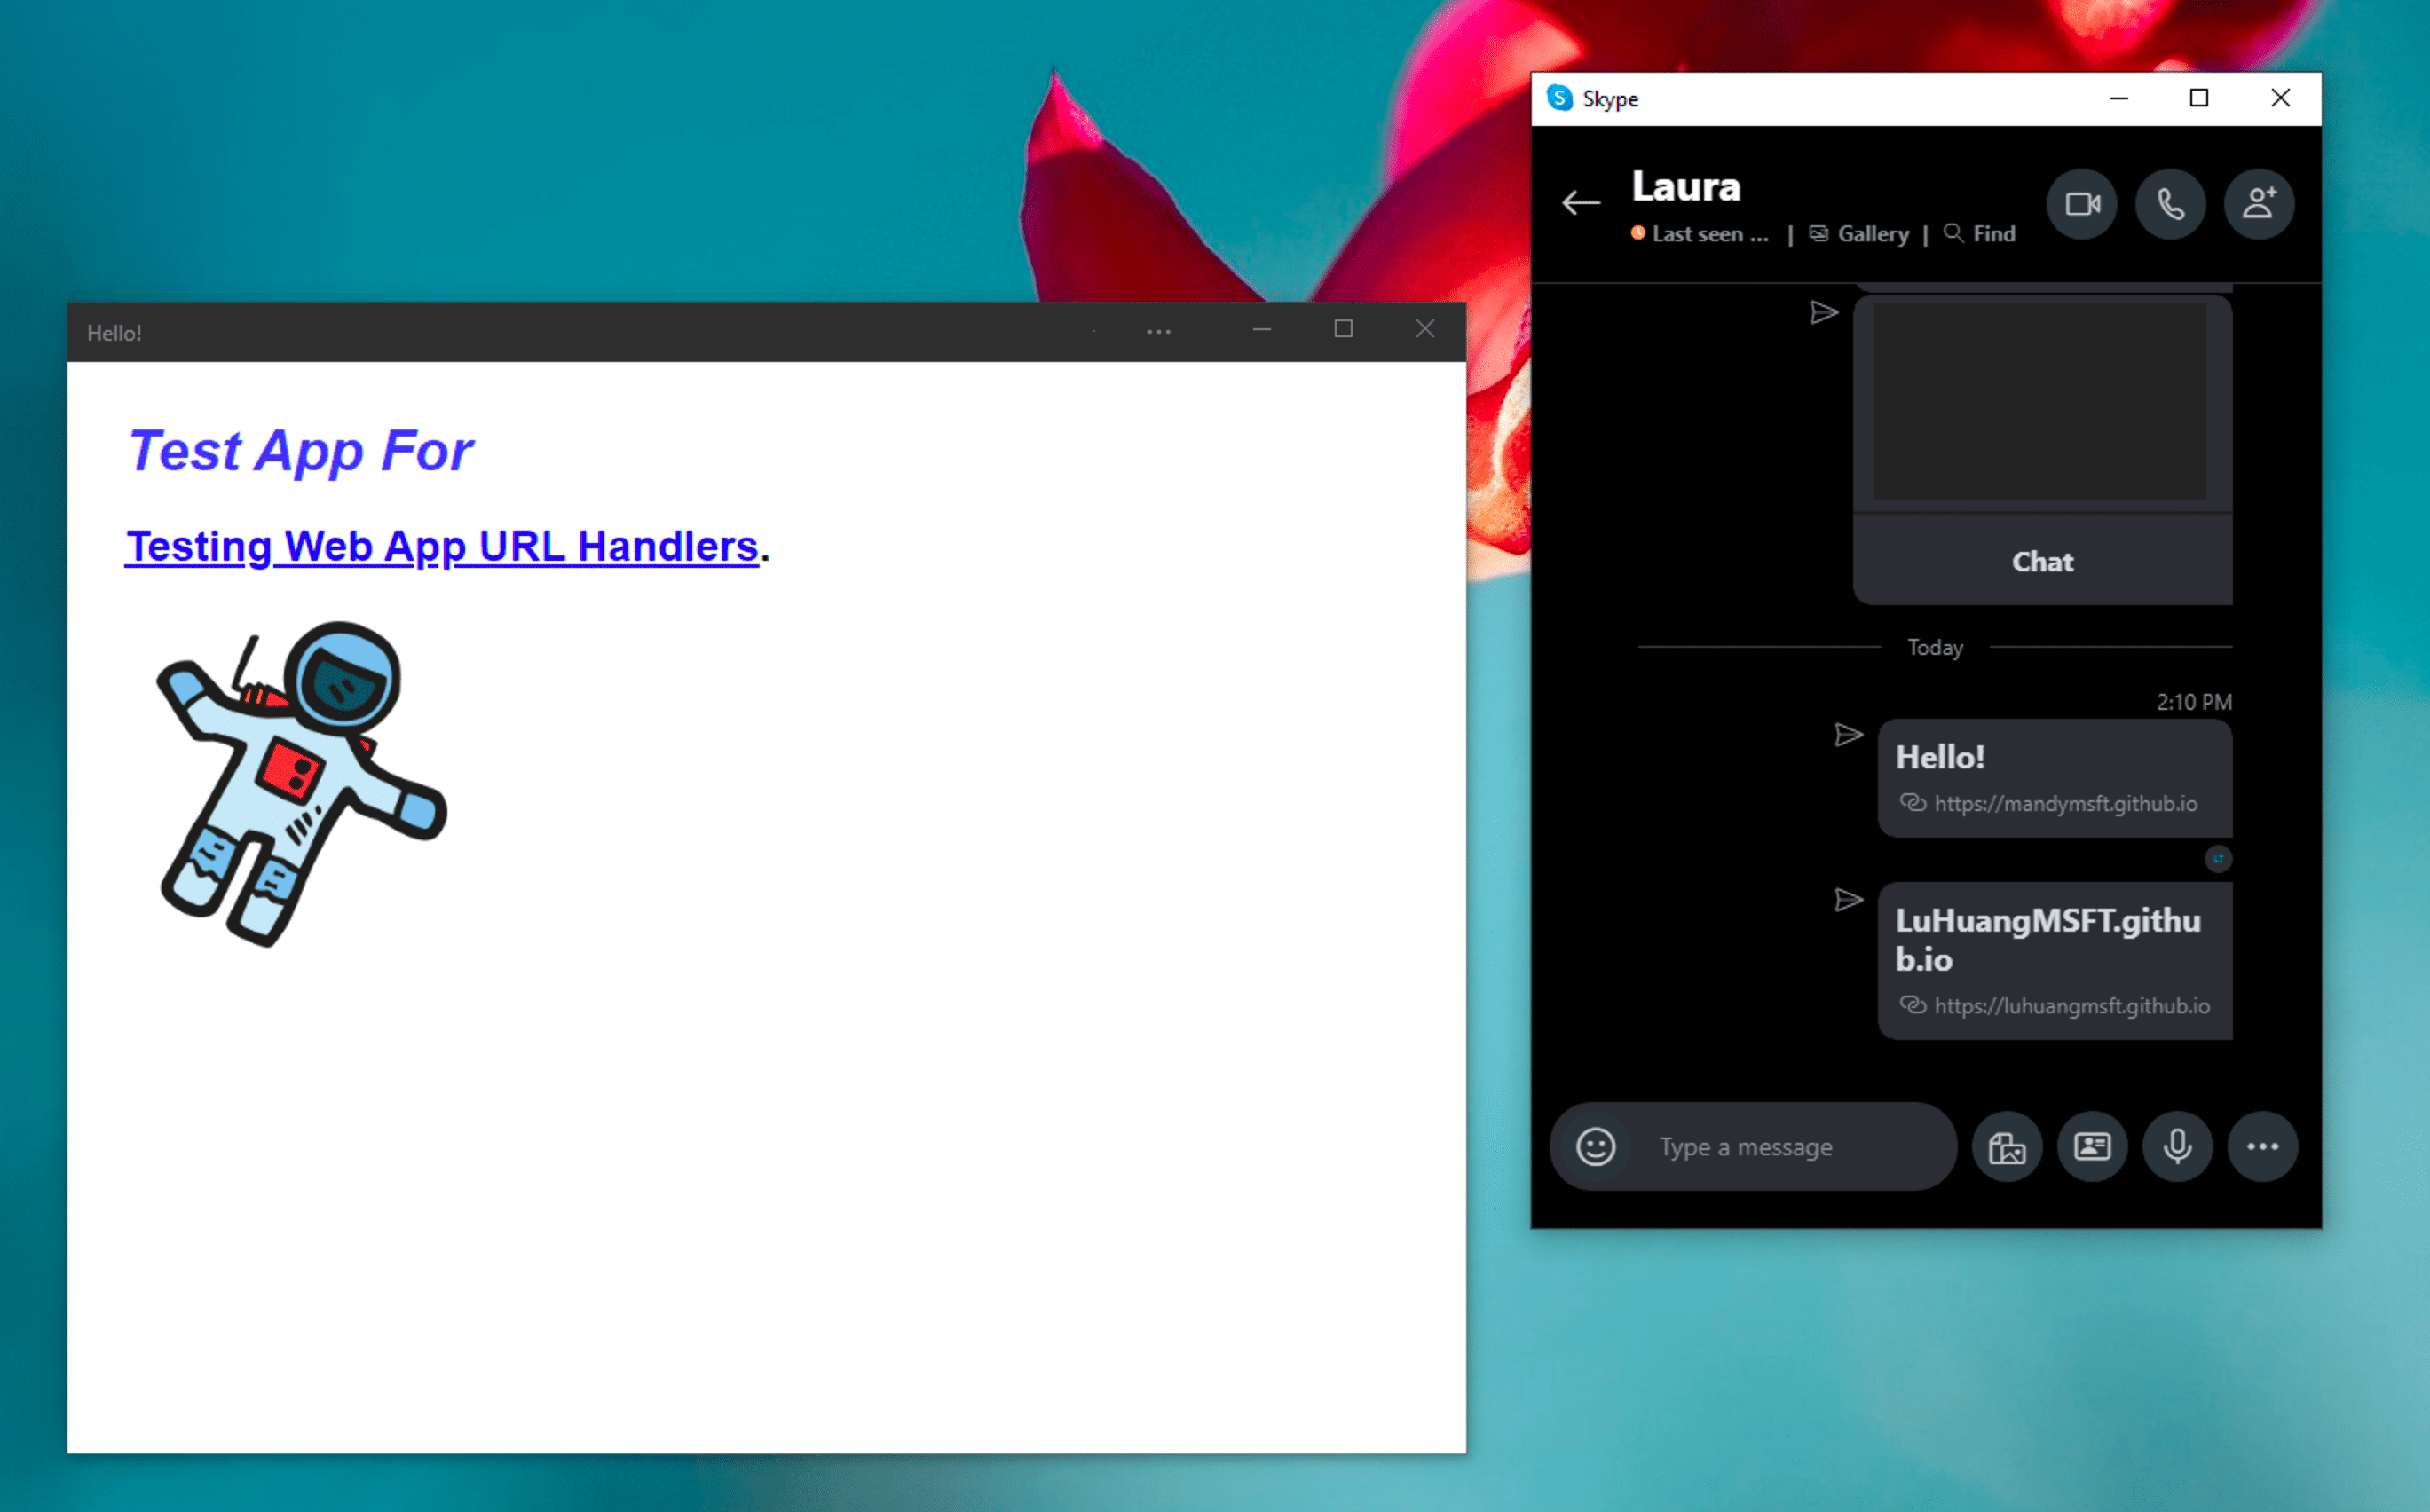 The Windows Skype instant messenger app next to the installed demo PWA, which is opened in standalone mode after clicking a link handled by it in a Skype chat message.